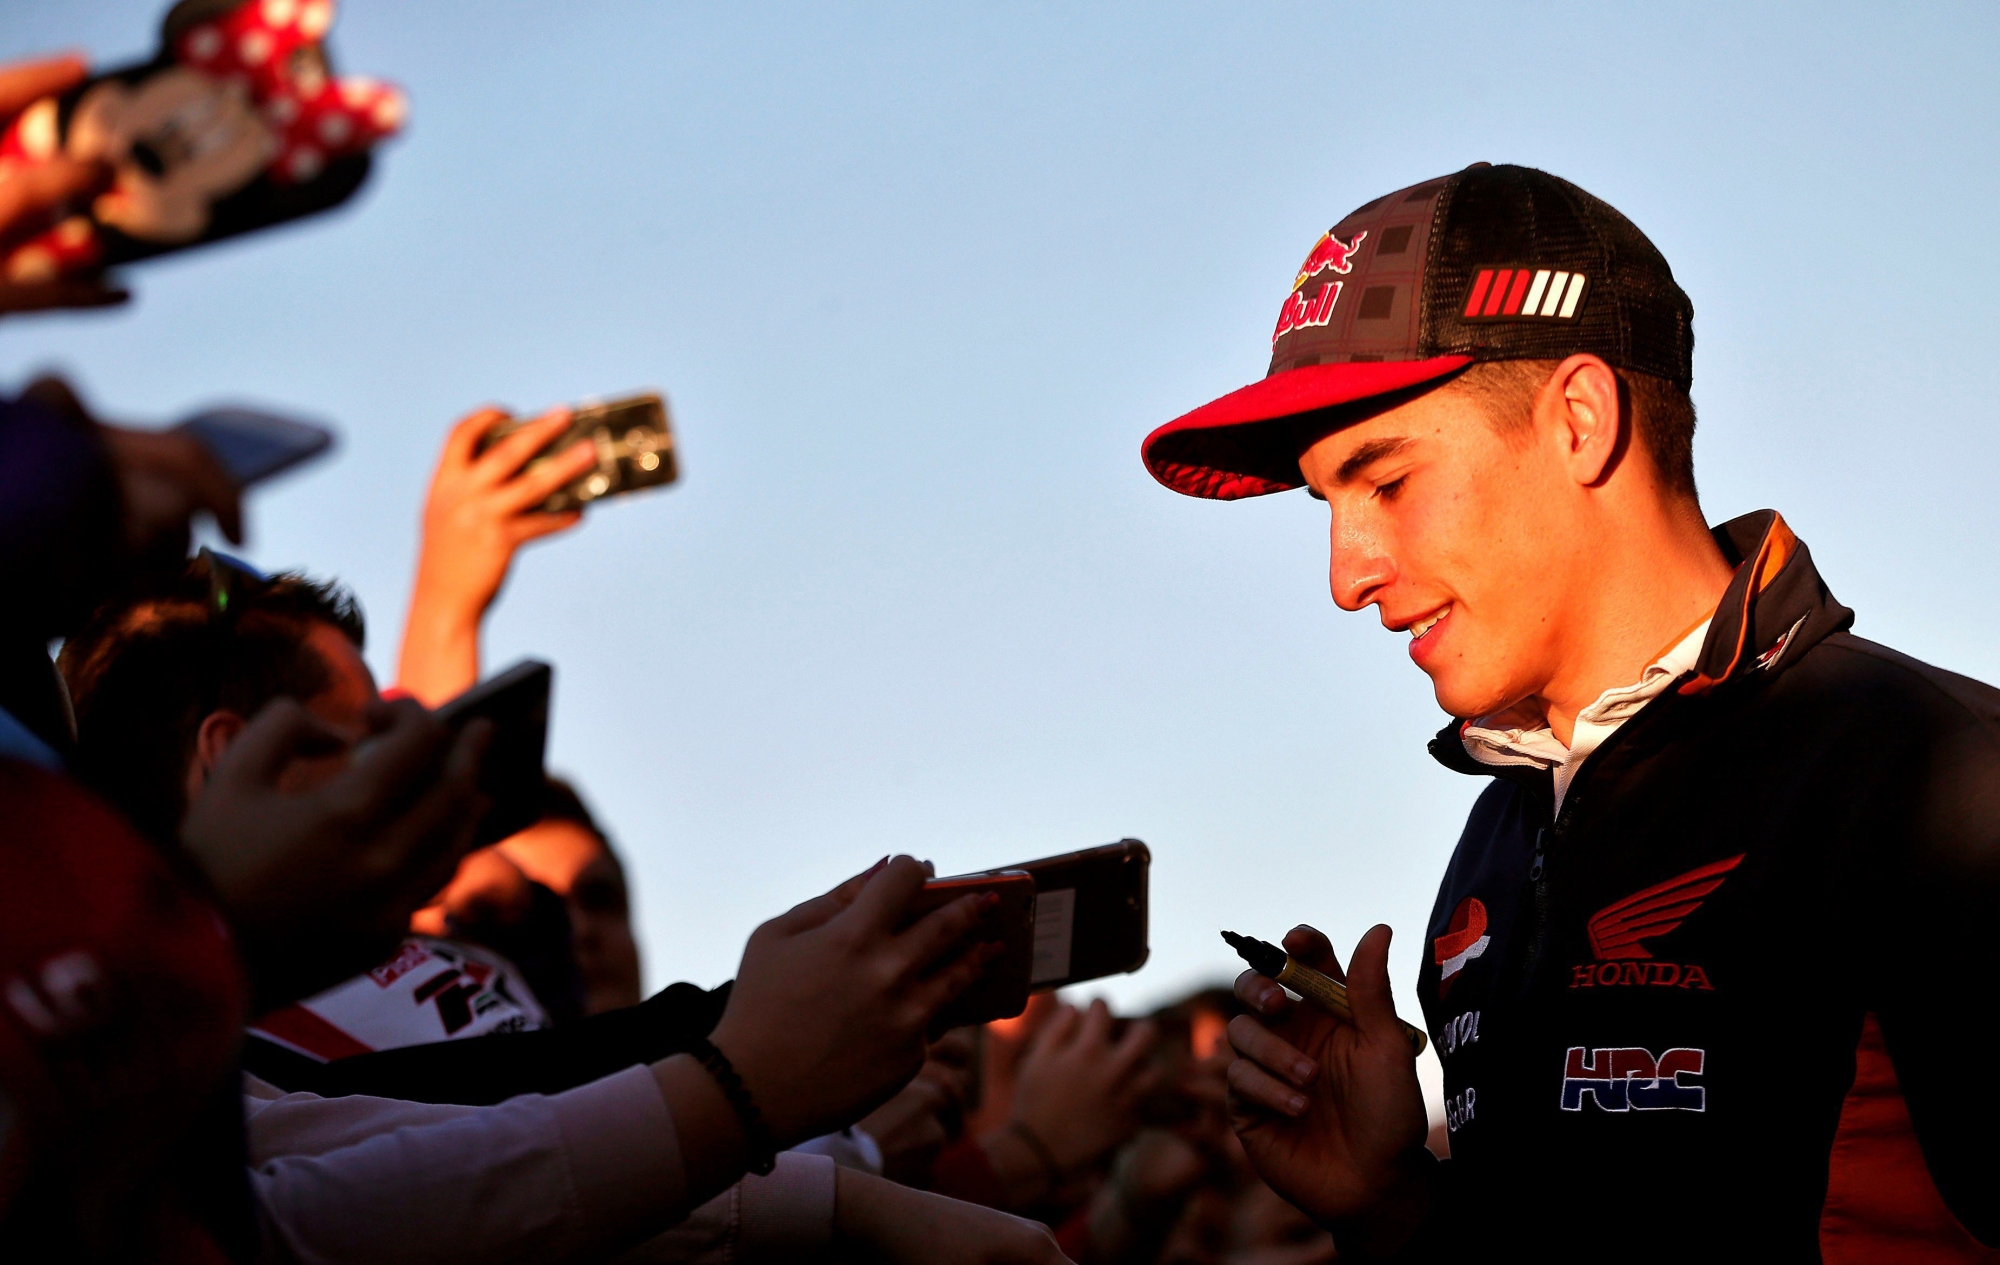 epa06318645 Spanish MotoGP rider Marc Marquez (L), of Repsol Honda, signs autographs to fans ahead of Valencia's Grand Prix at Cheste circuit in Valencia, Spain, 09 November 2017. The Valencia Motorcycling Grand Prix will be held 12 November 2017.  EPA/MANUEL BRUQUE SPAIN MOTORCYCLING GRAND PRIX